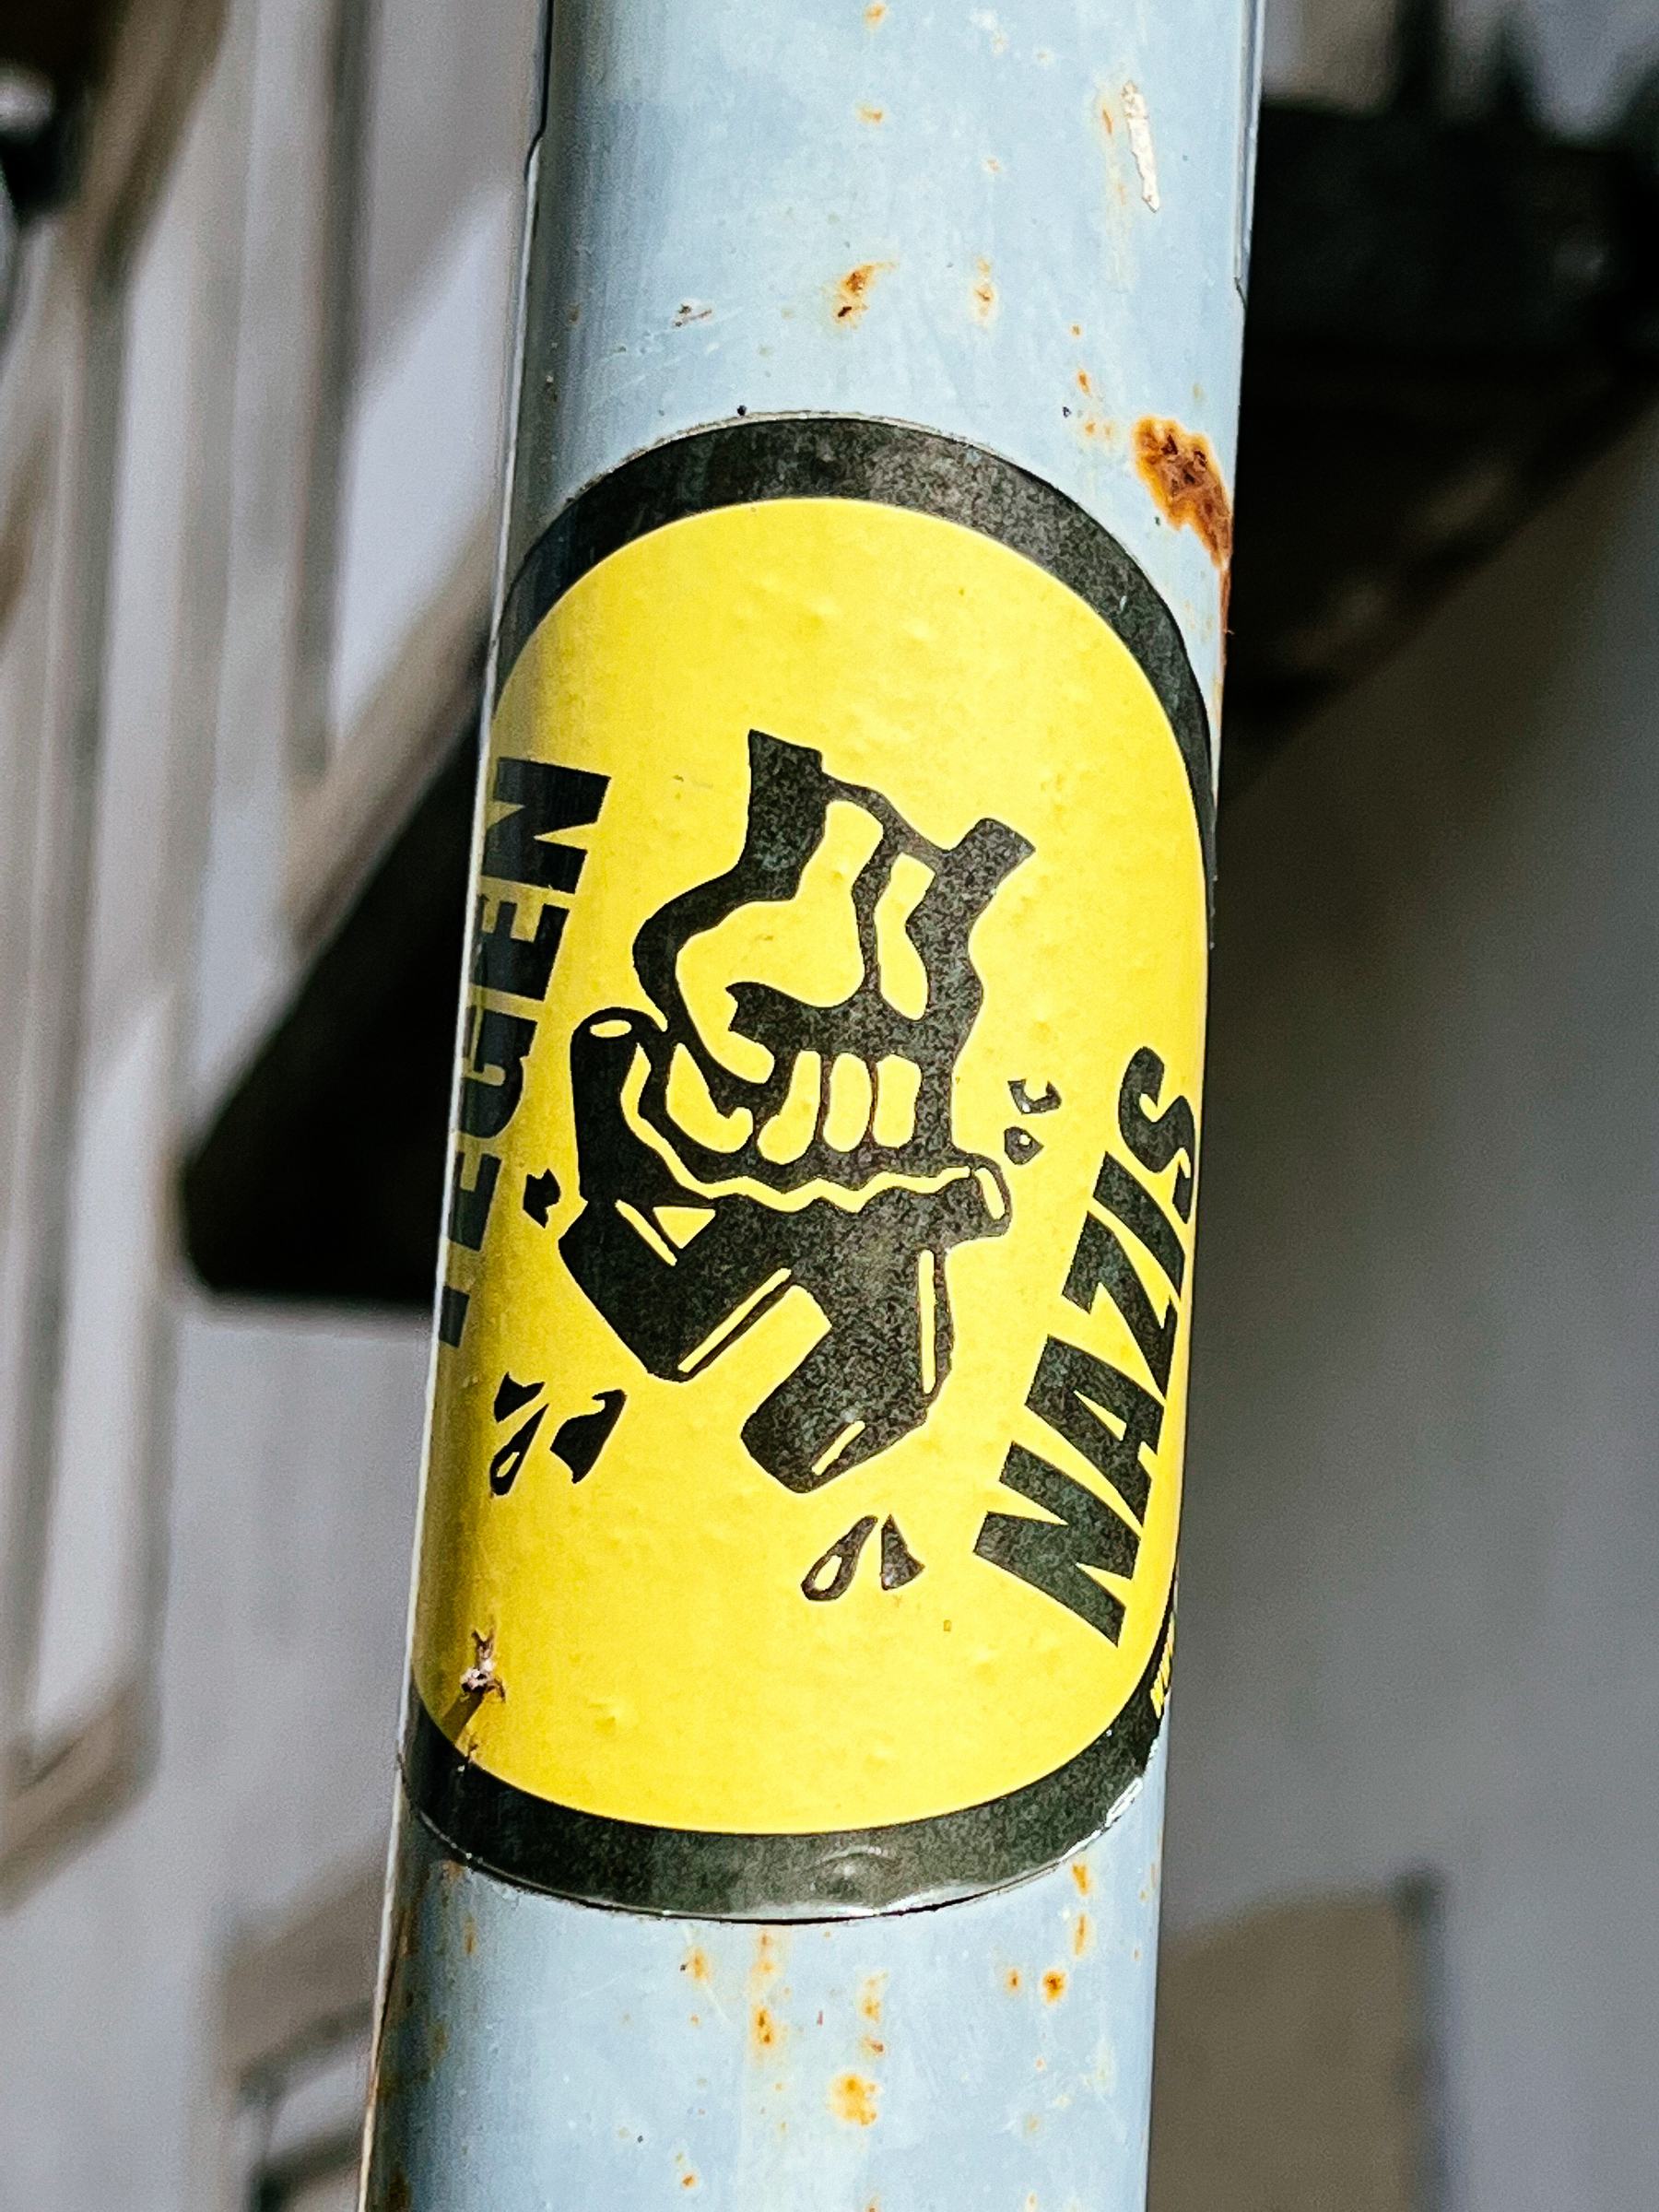 Sticker of a hand smashing a swastika, with the word “nazi” visible.  